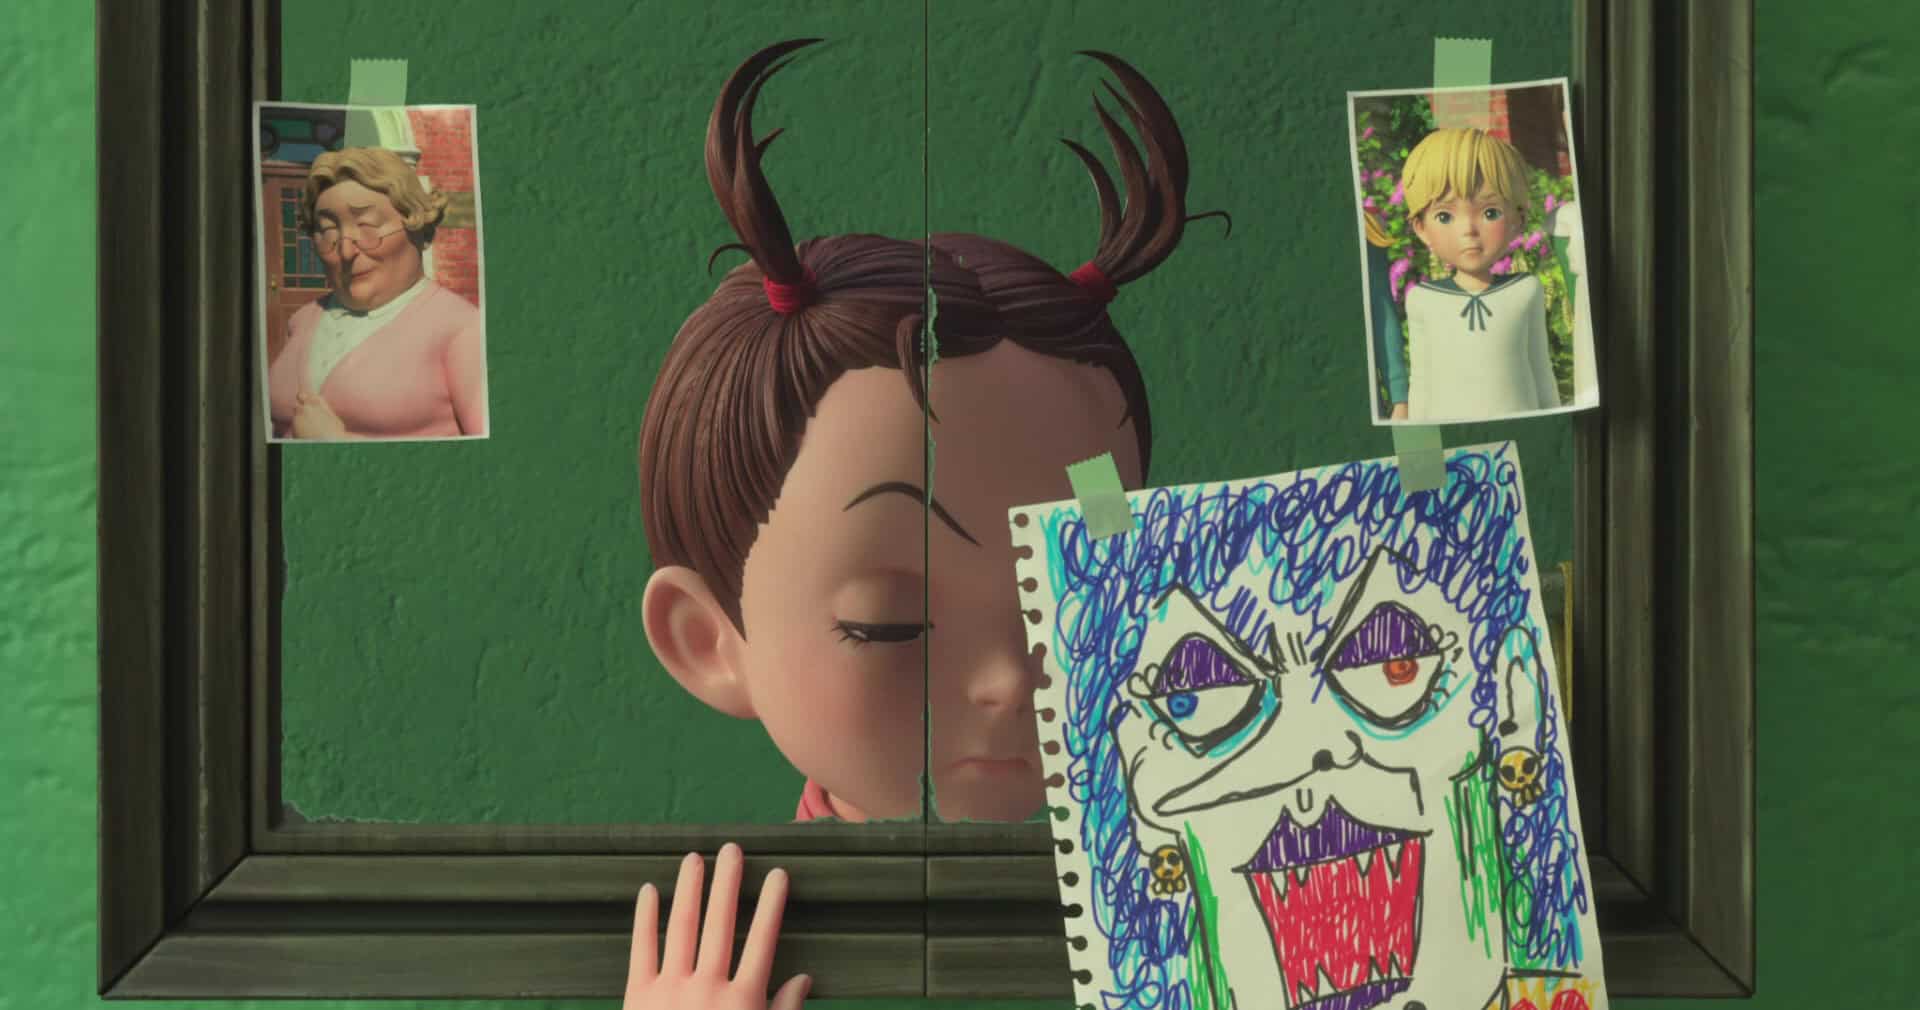 A 3D-animated girl looks in a mirror with taped photos in this image from Studio Ghibli.